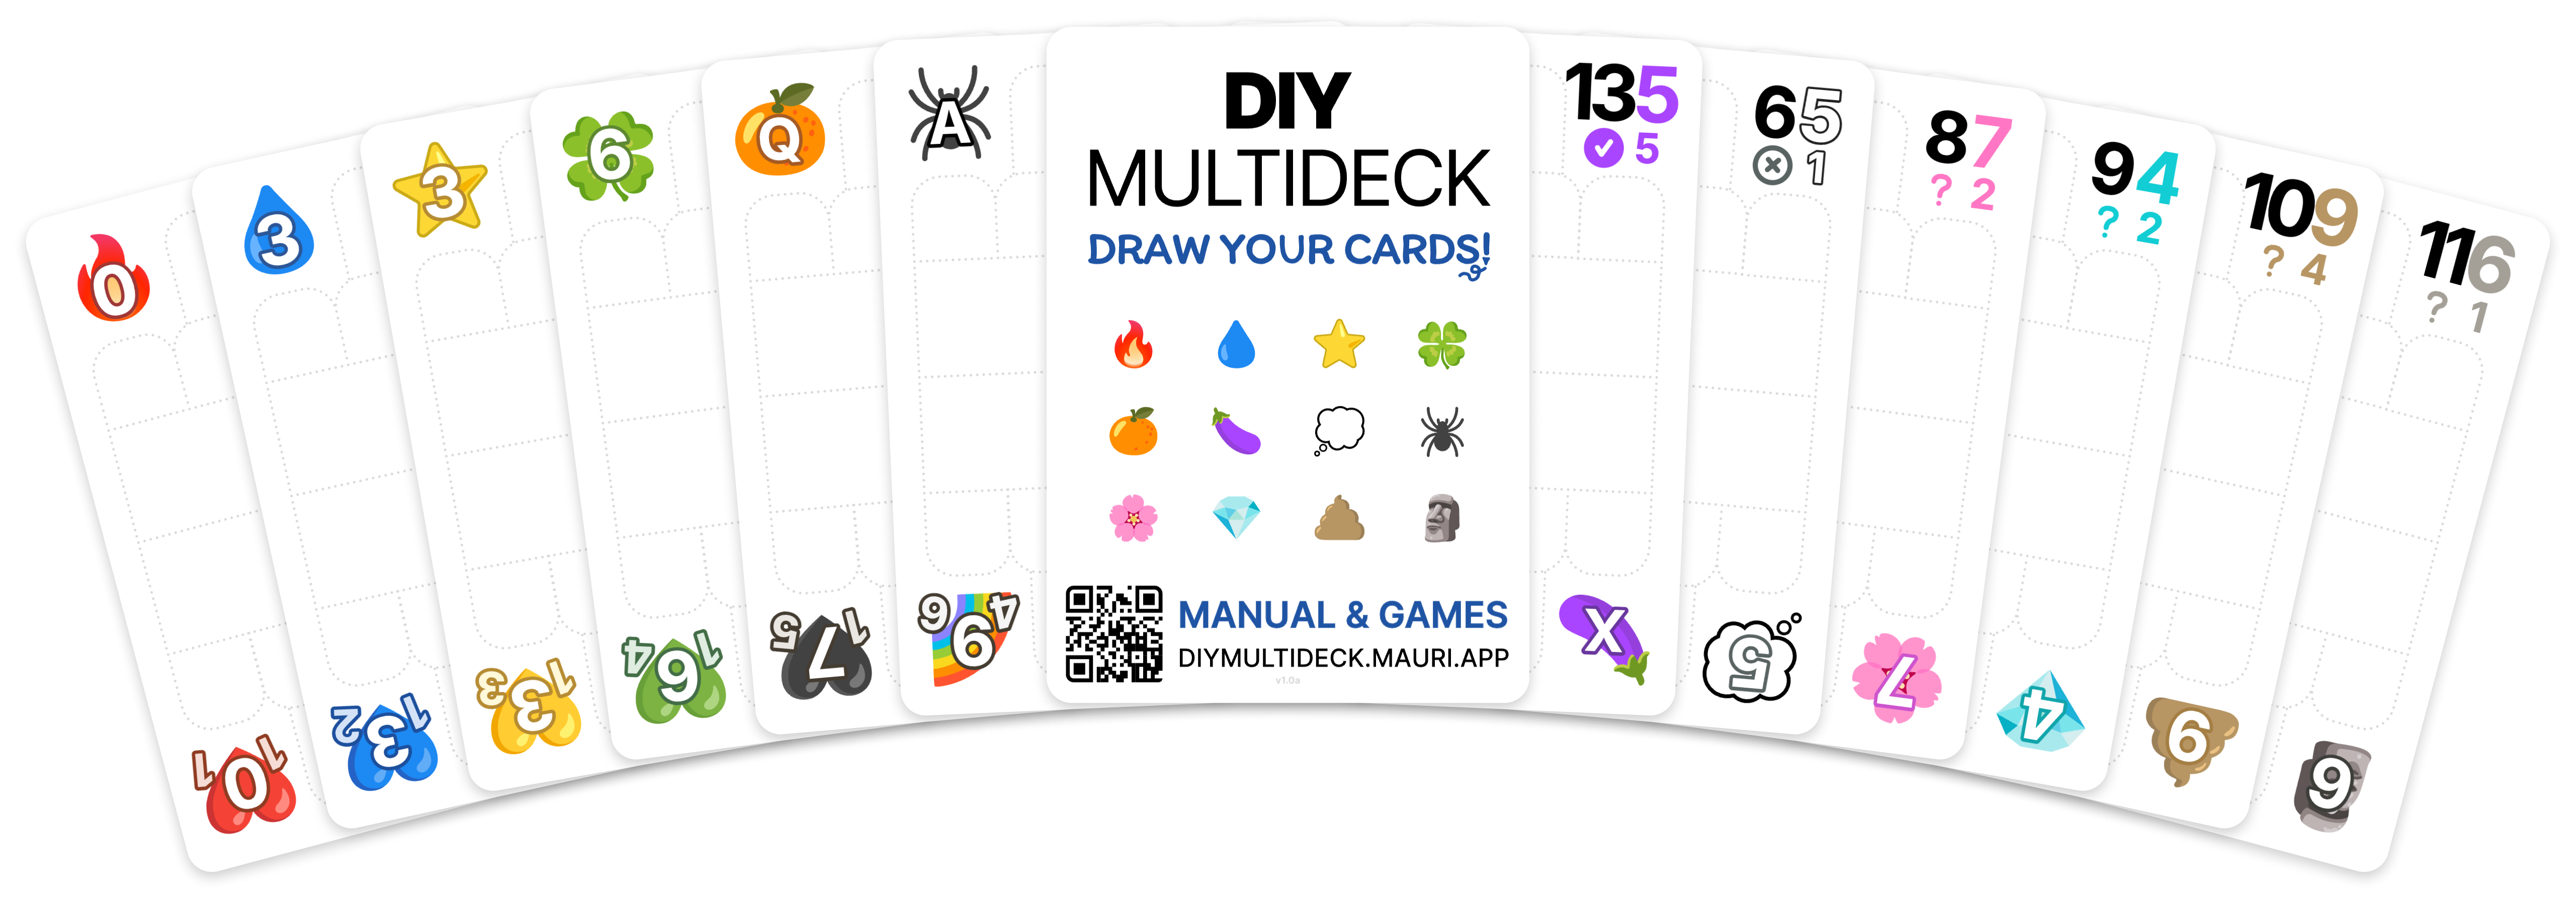 Preview of some cards of The DIY Multideck